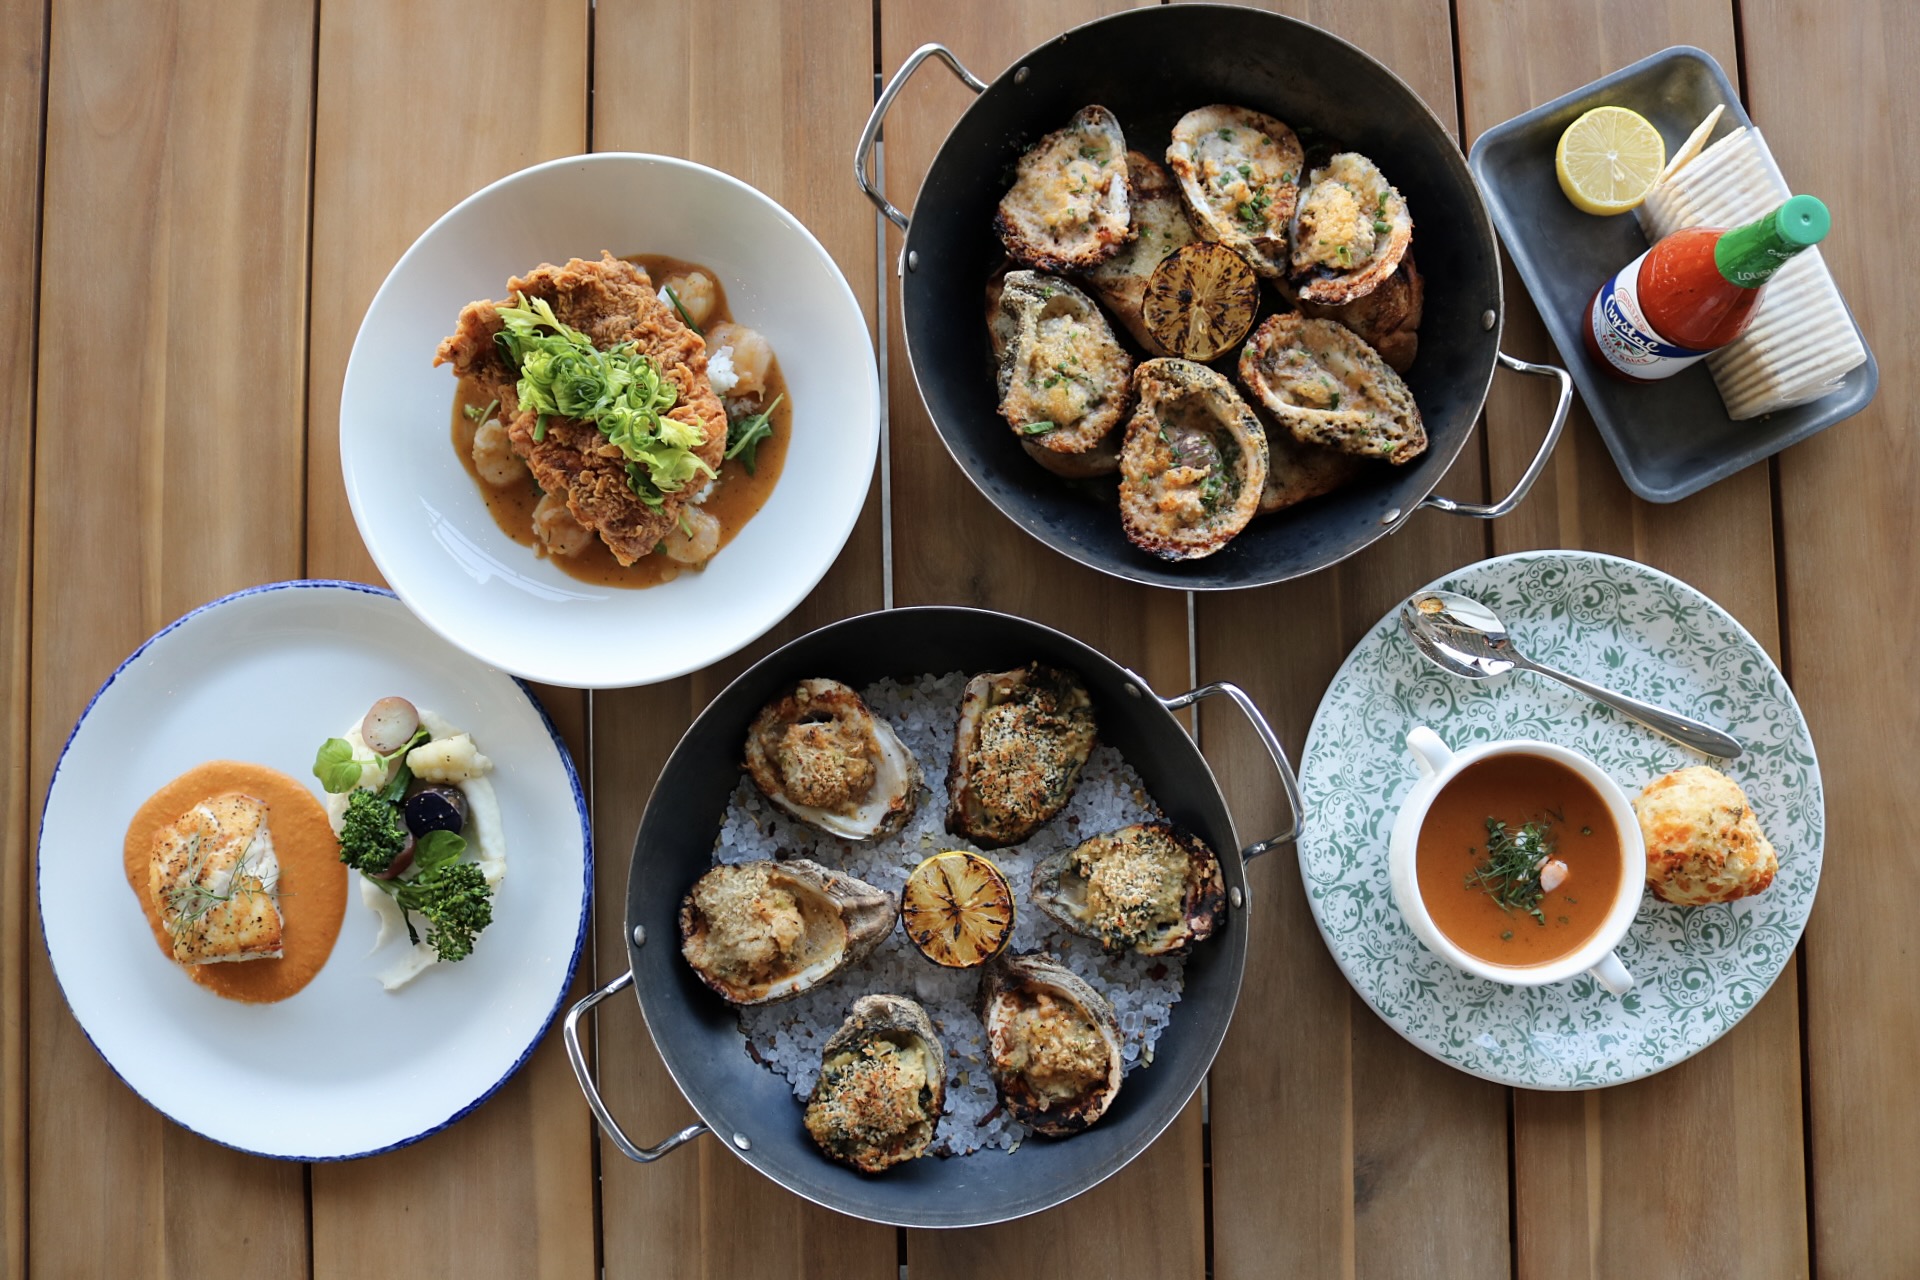 Oysters, seafood bisque, and other seafood dishes on a wood table